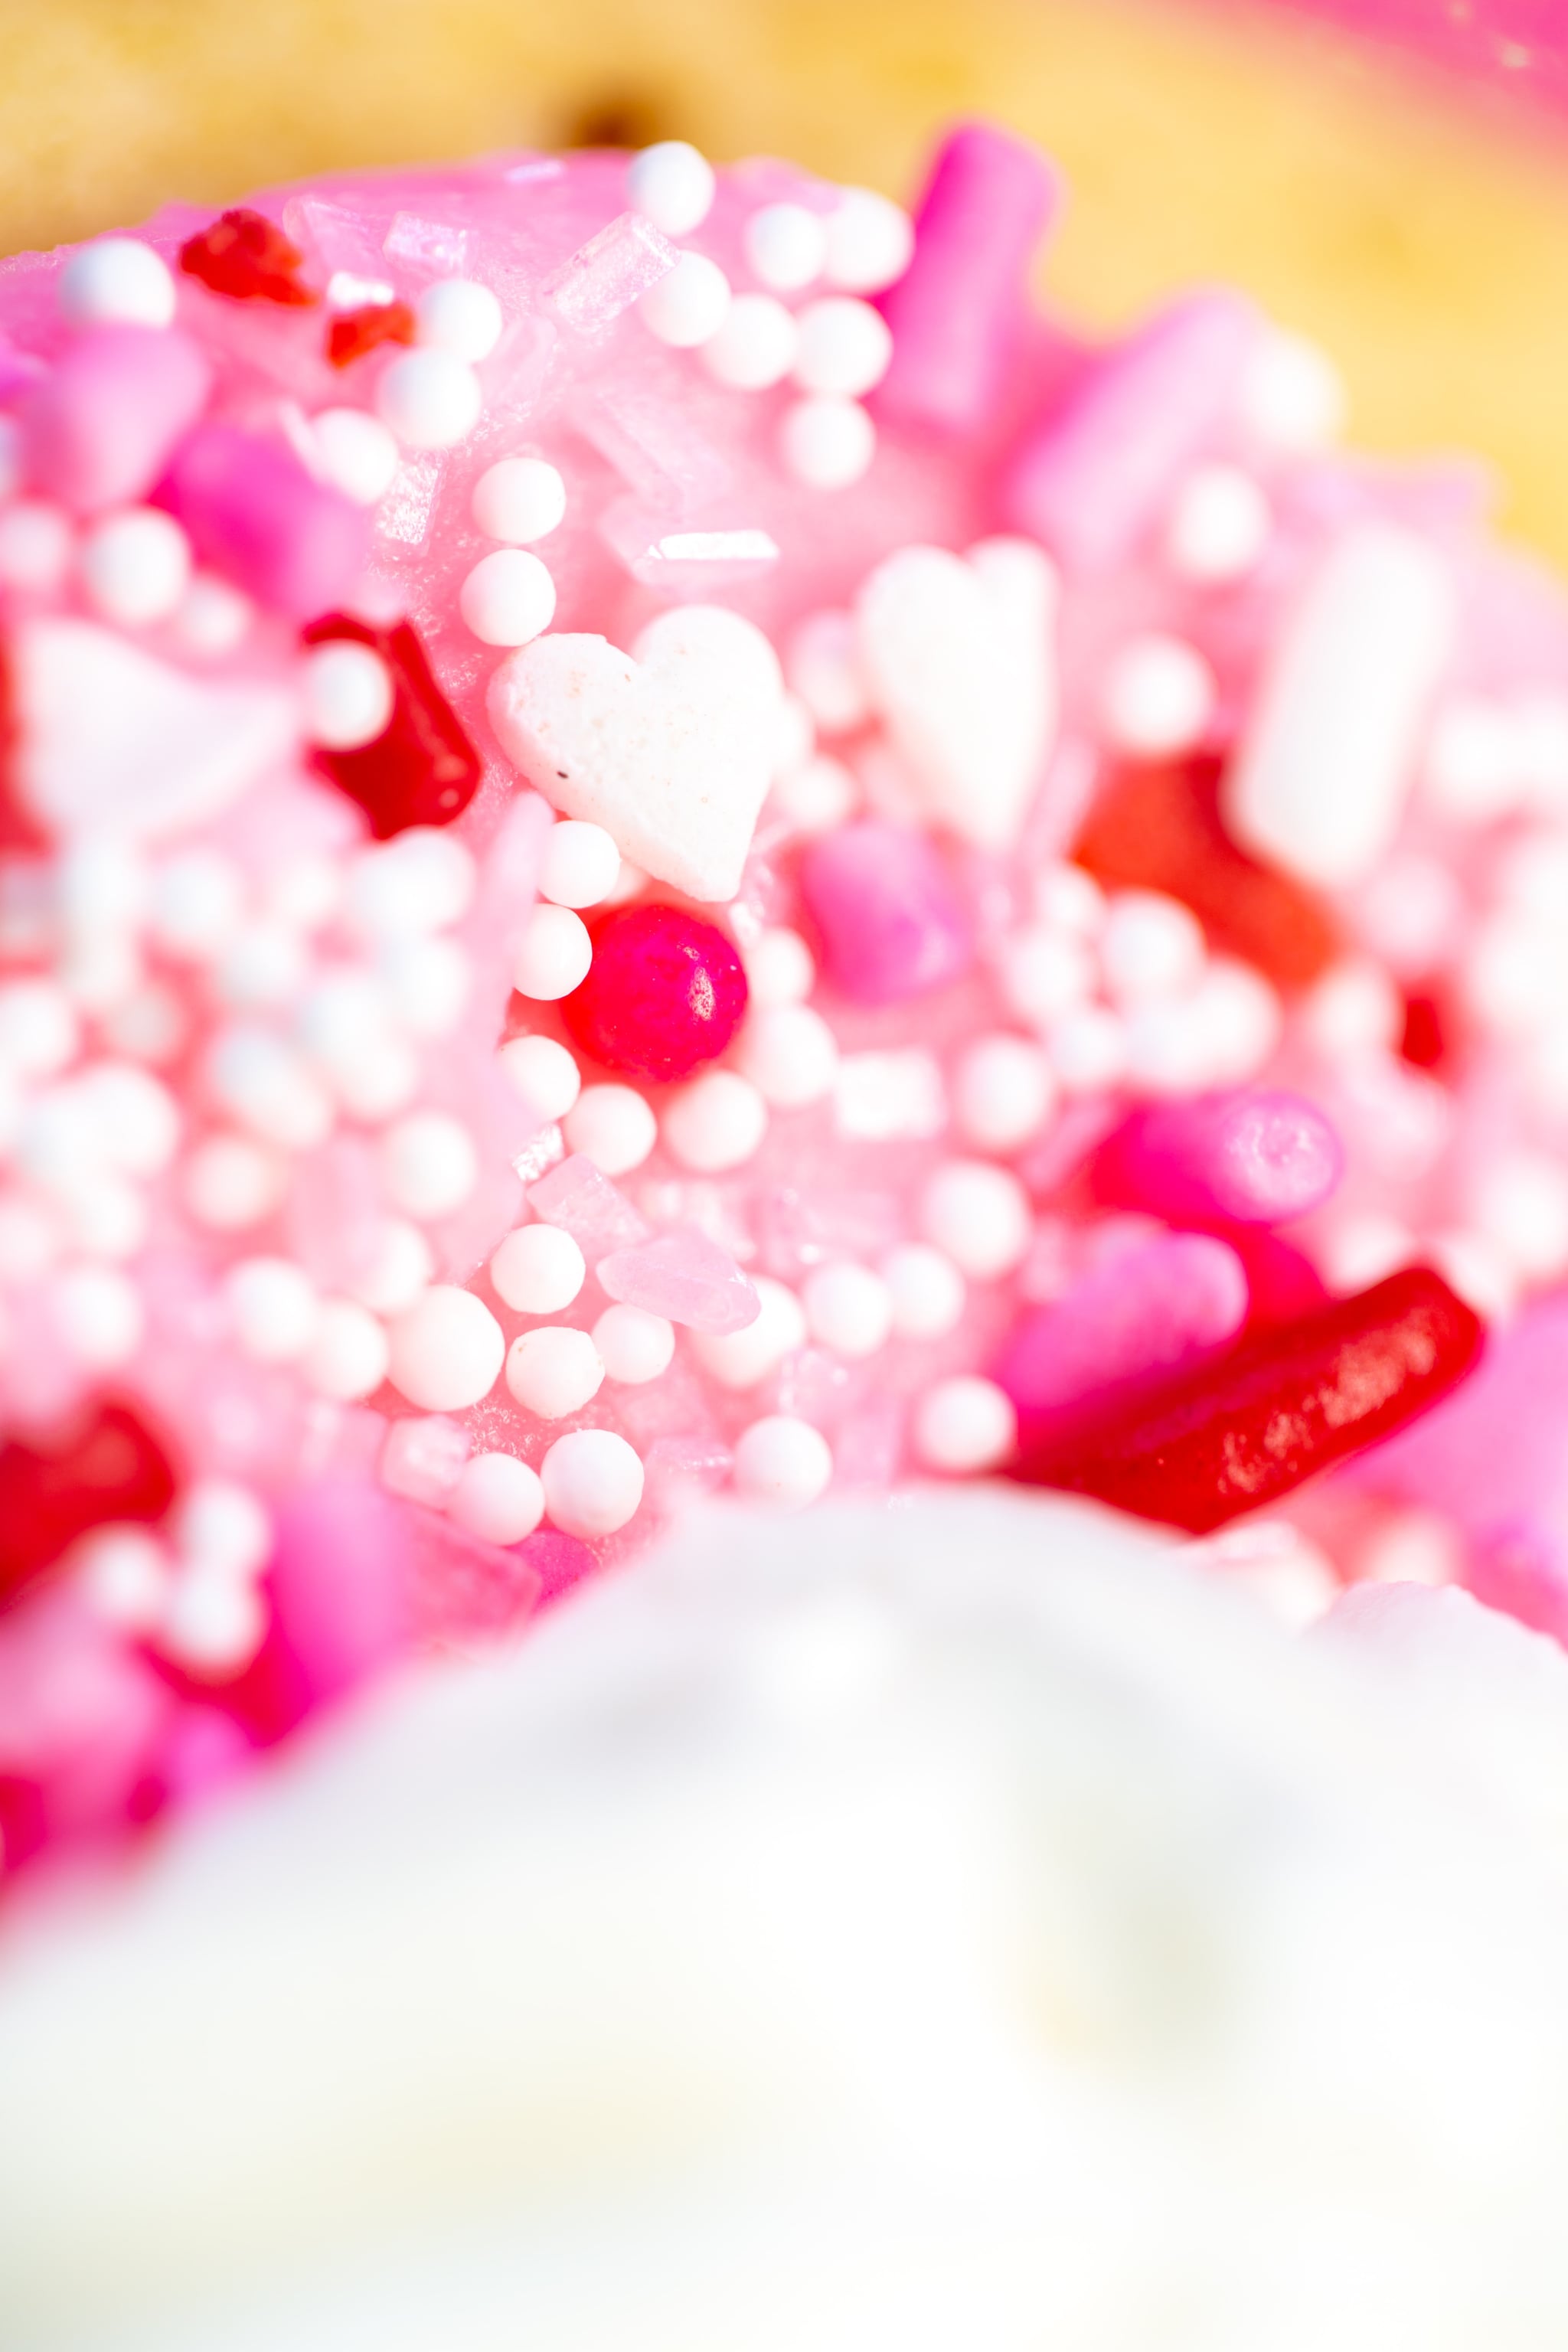 A close up of some pink and white candy - Heart, Valentine's Day